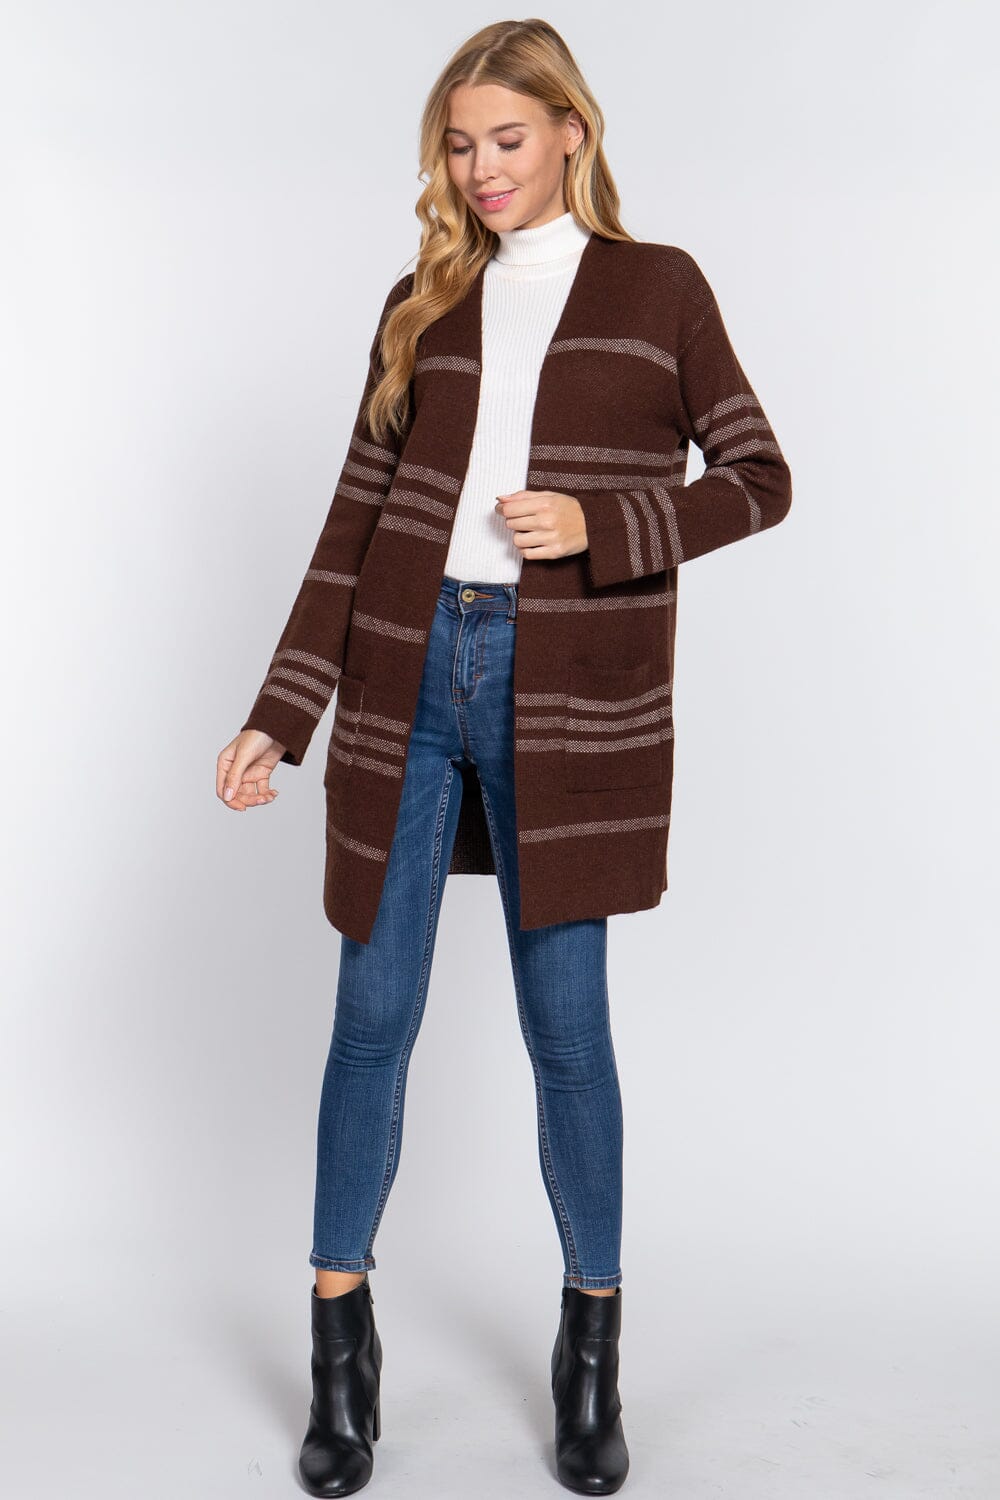 Brown Cream Long Sleeve Stripe Open Sweater Long Cardigan with Pockets_ jehouze 